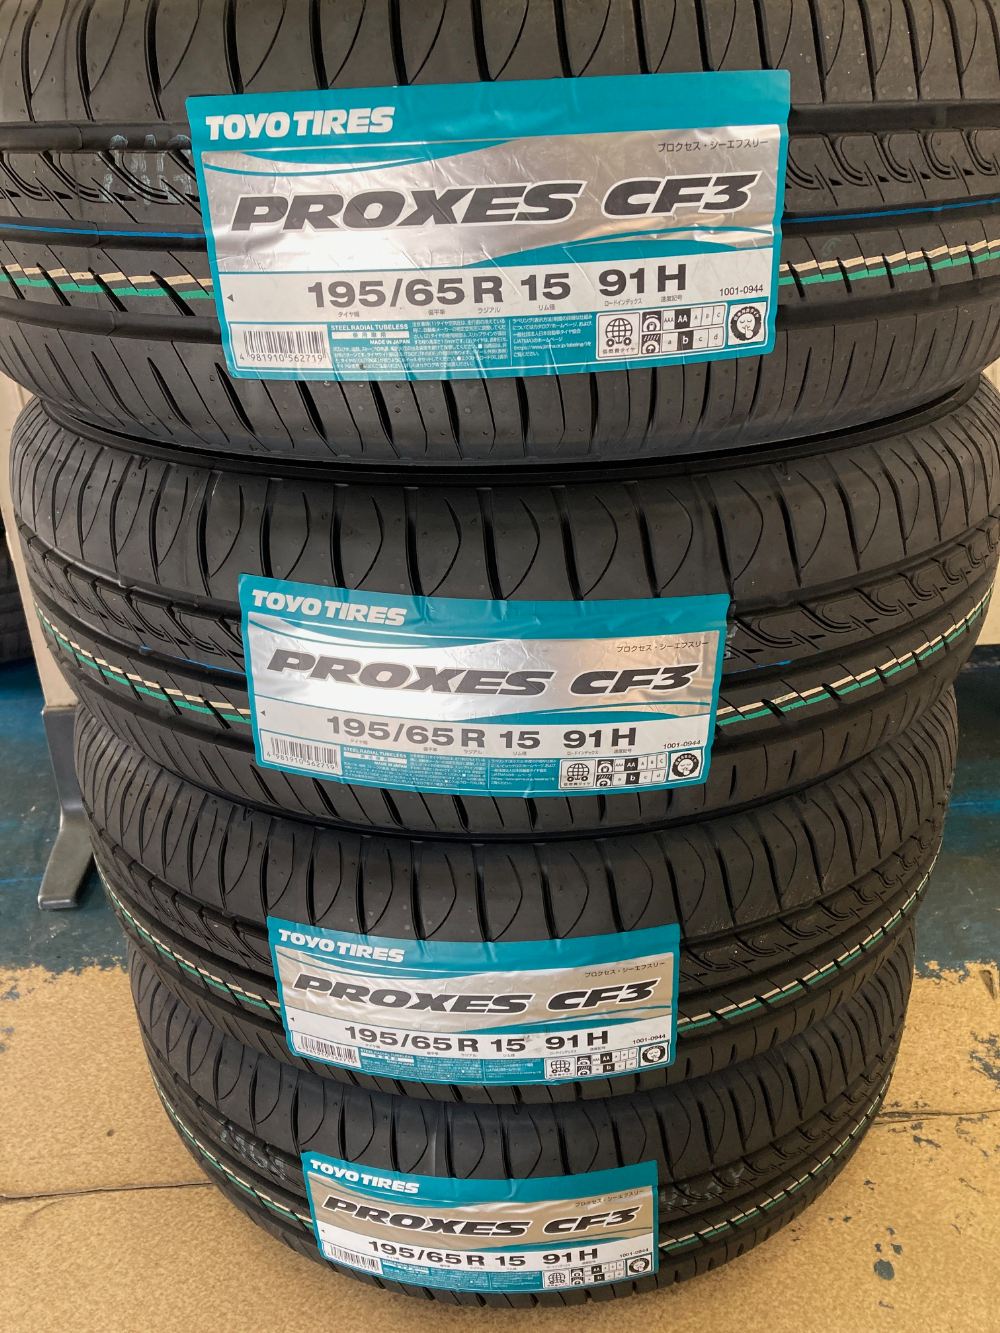 TOYO TIRES NEW Price 2024年製/即日発送【225/55R17 101V XL】TOYO PROXES CL1 SUV タイヤ4本価格 送料込み57000円～